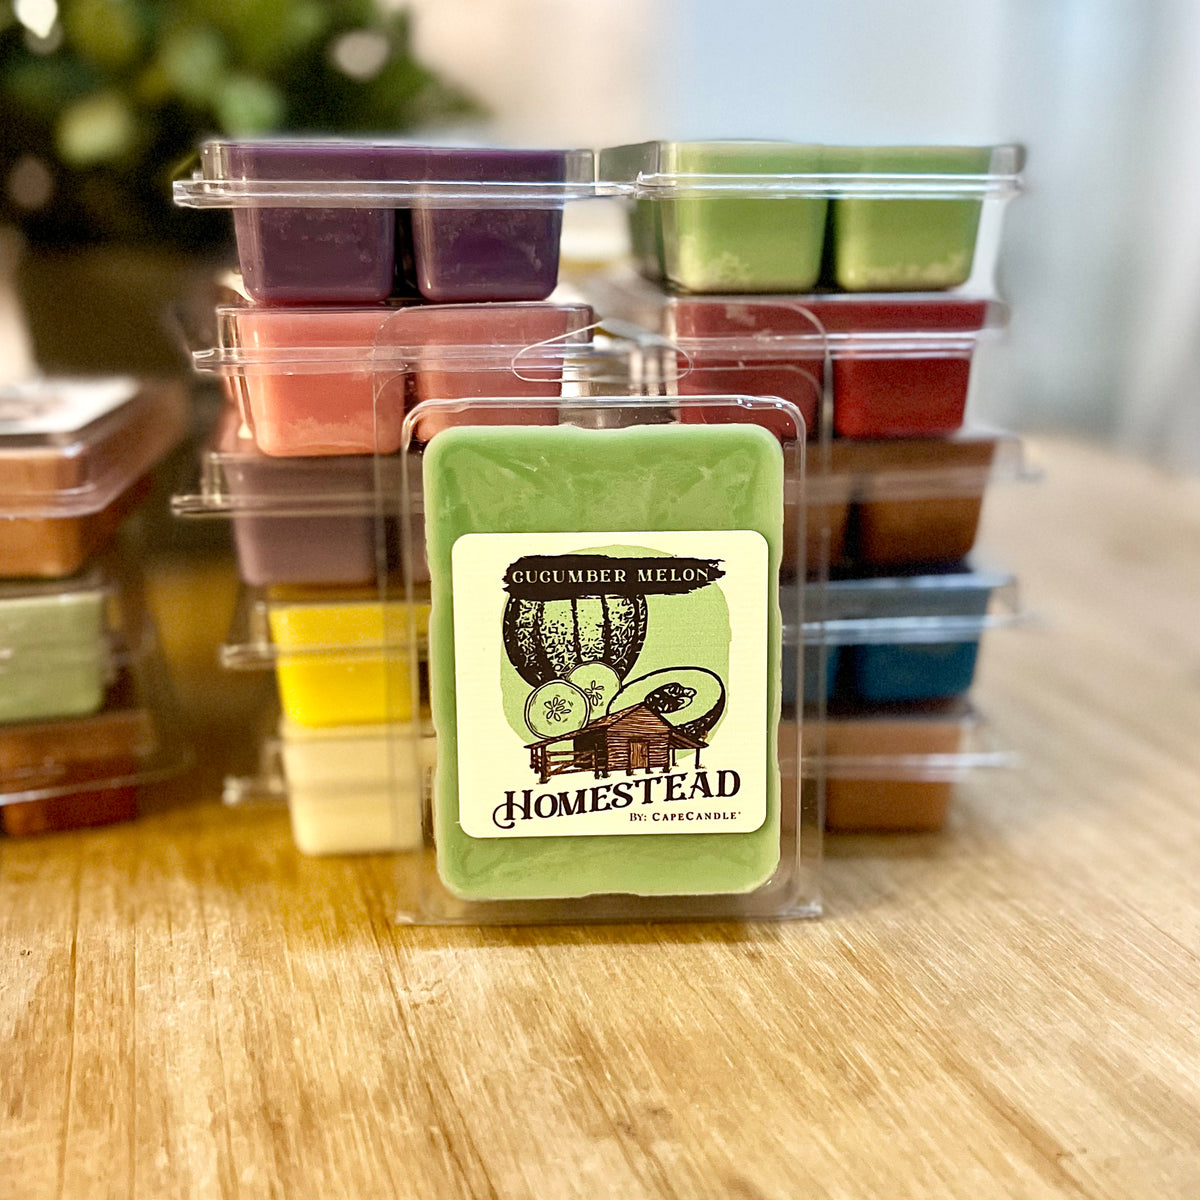 Cucumber Melon 3.5oz Homestead Soy Wax Melts by Cape Candle